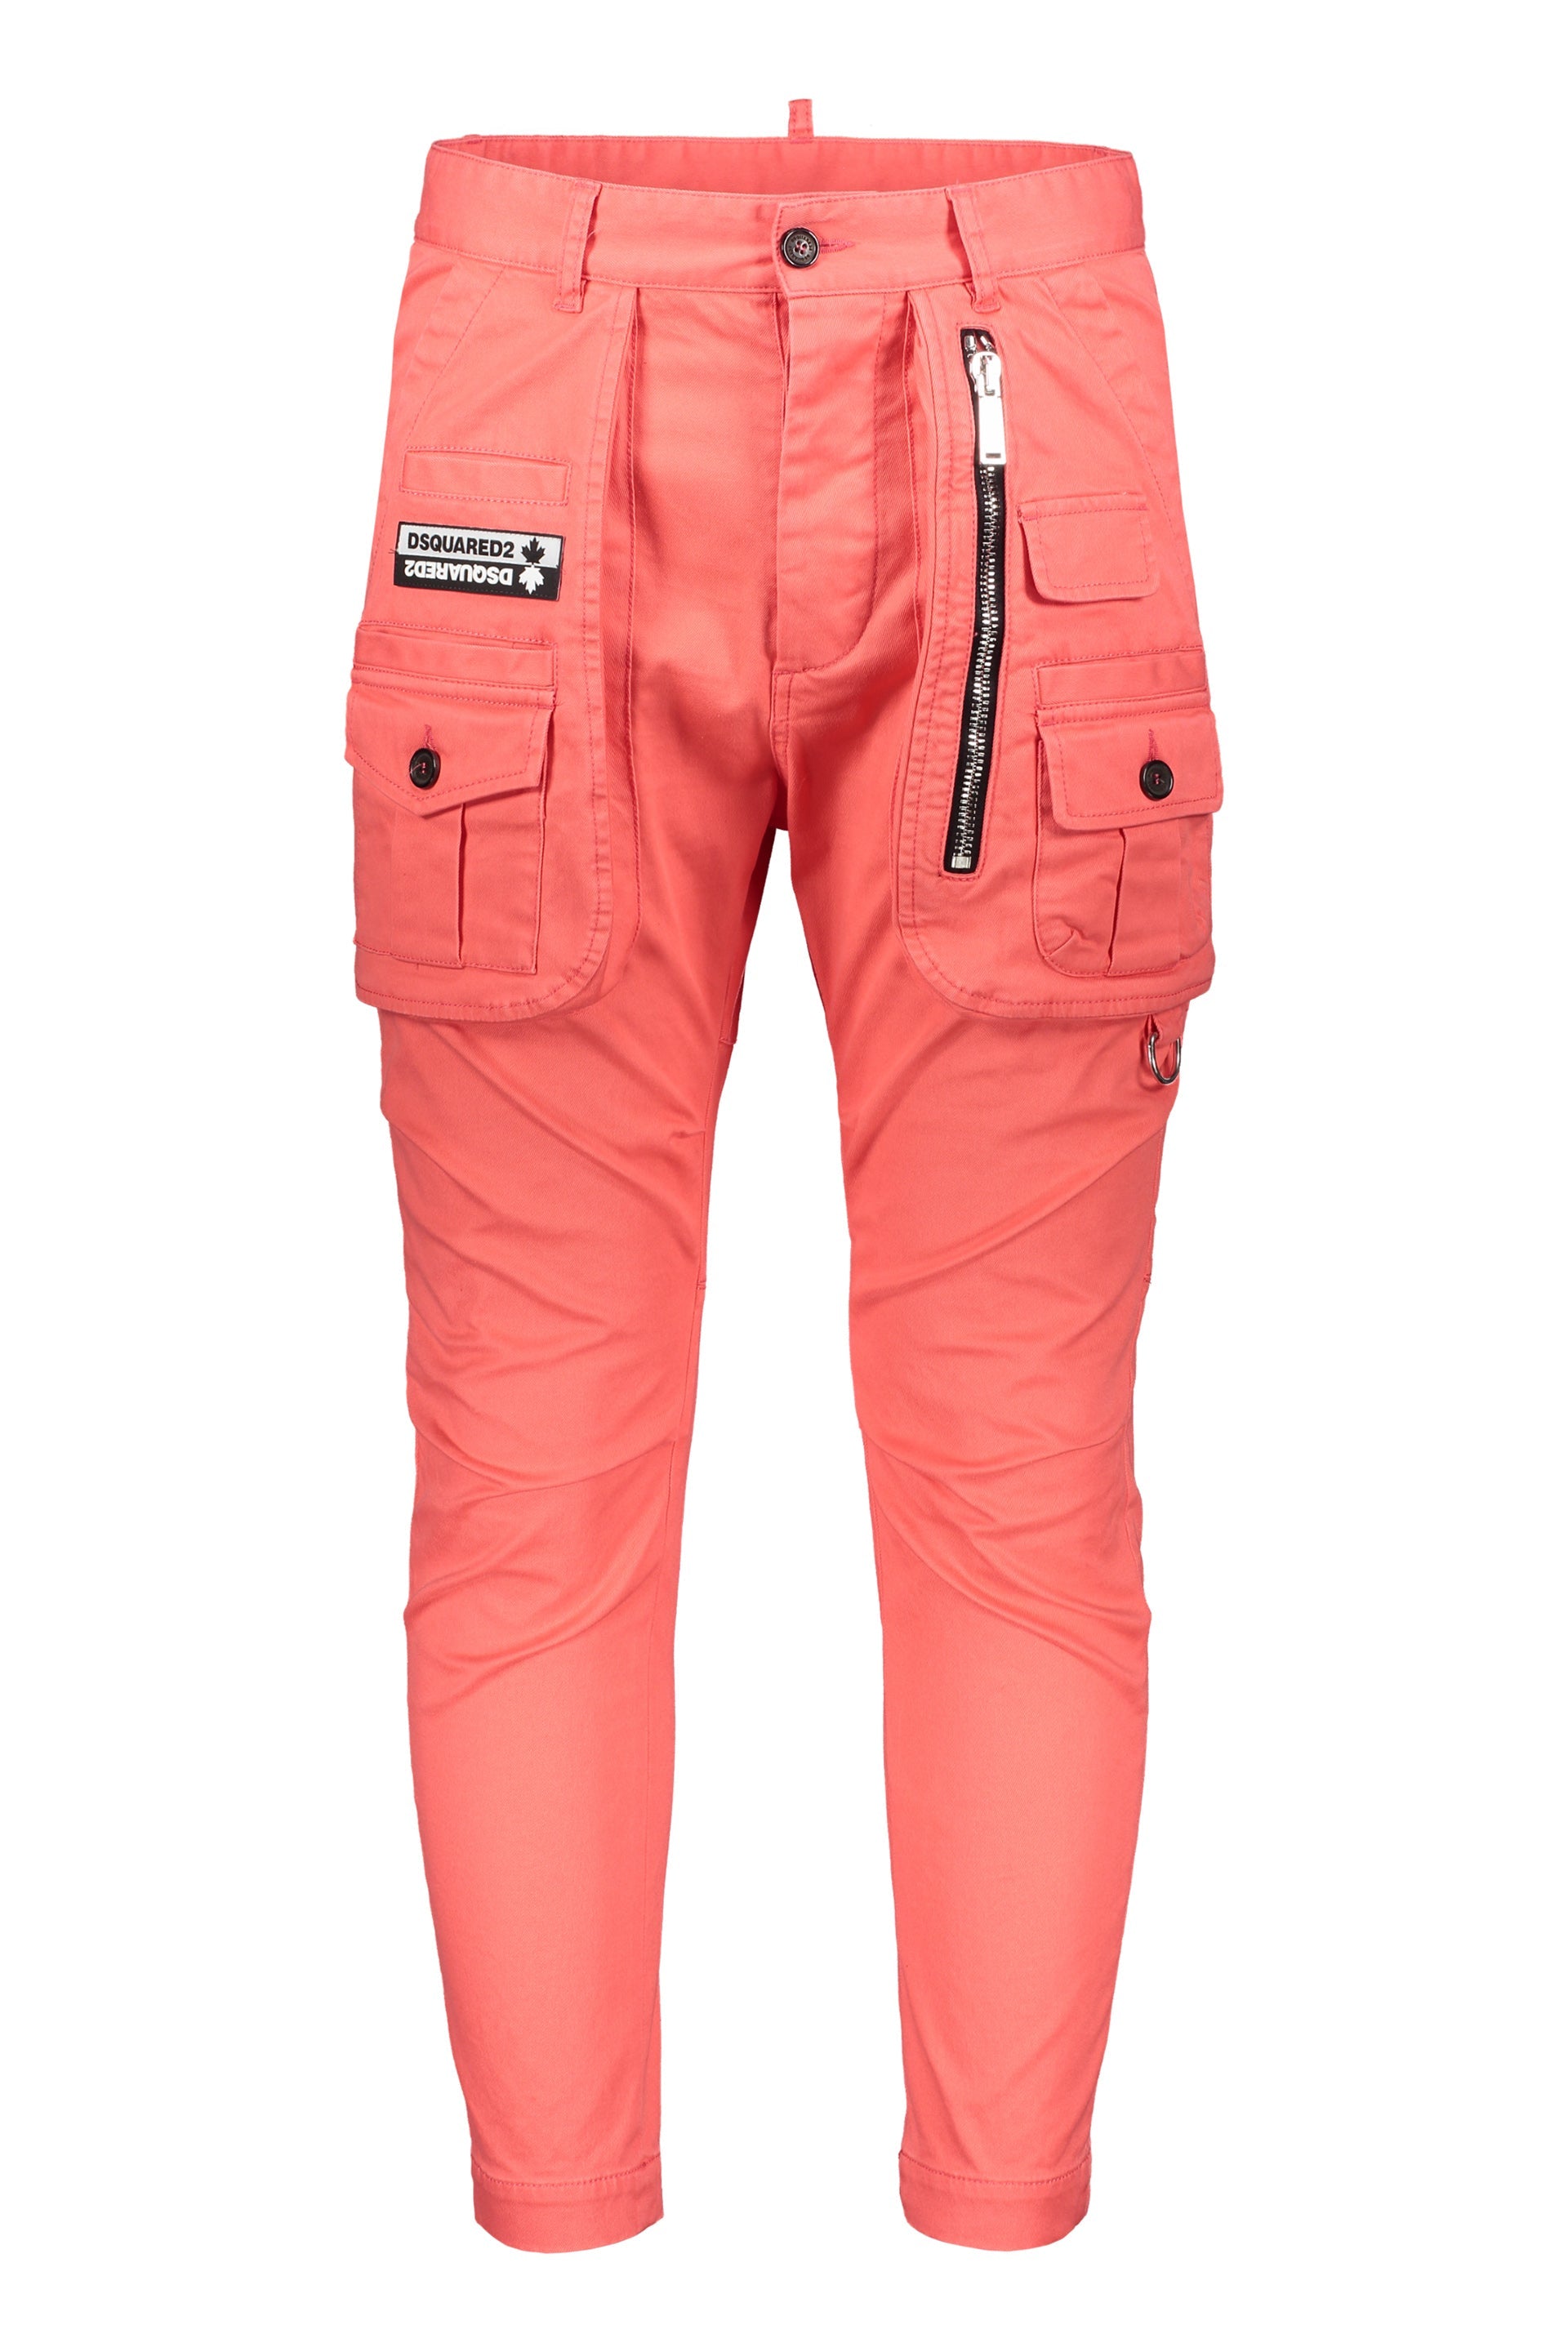 Dsquared2-OUTLET-SALE-Sexy-cargo-trouser-Hosen-44-ARCHIVE-COLLECTION.jpg